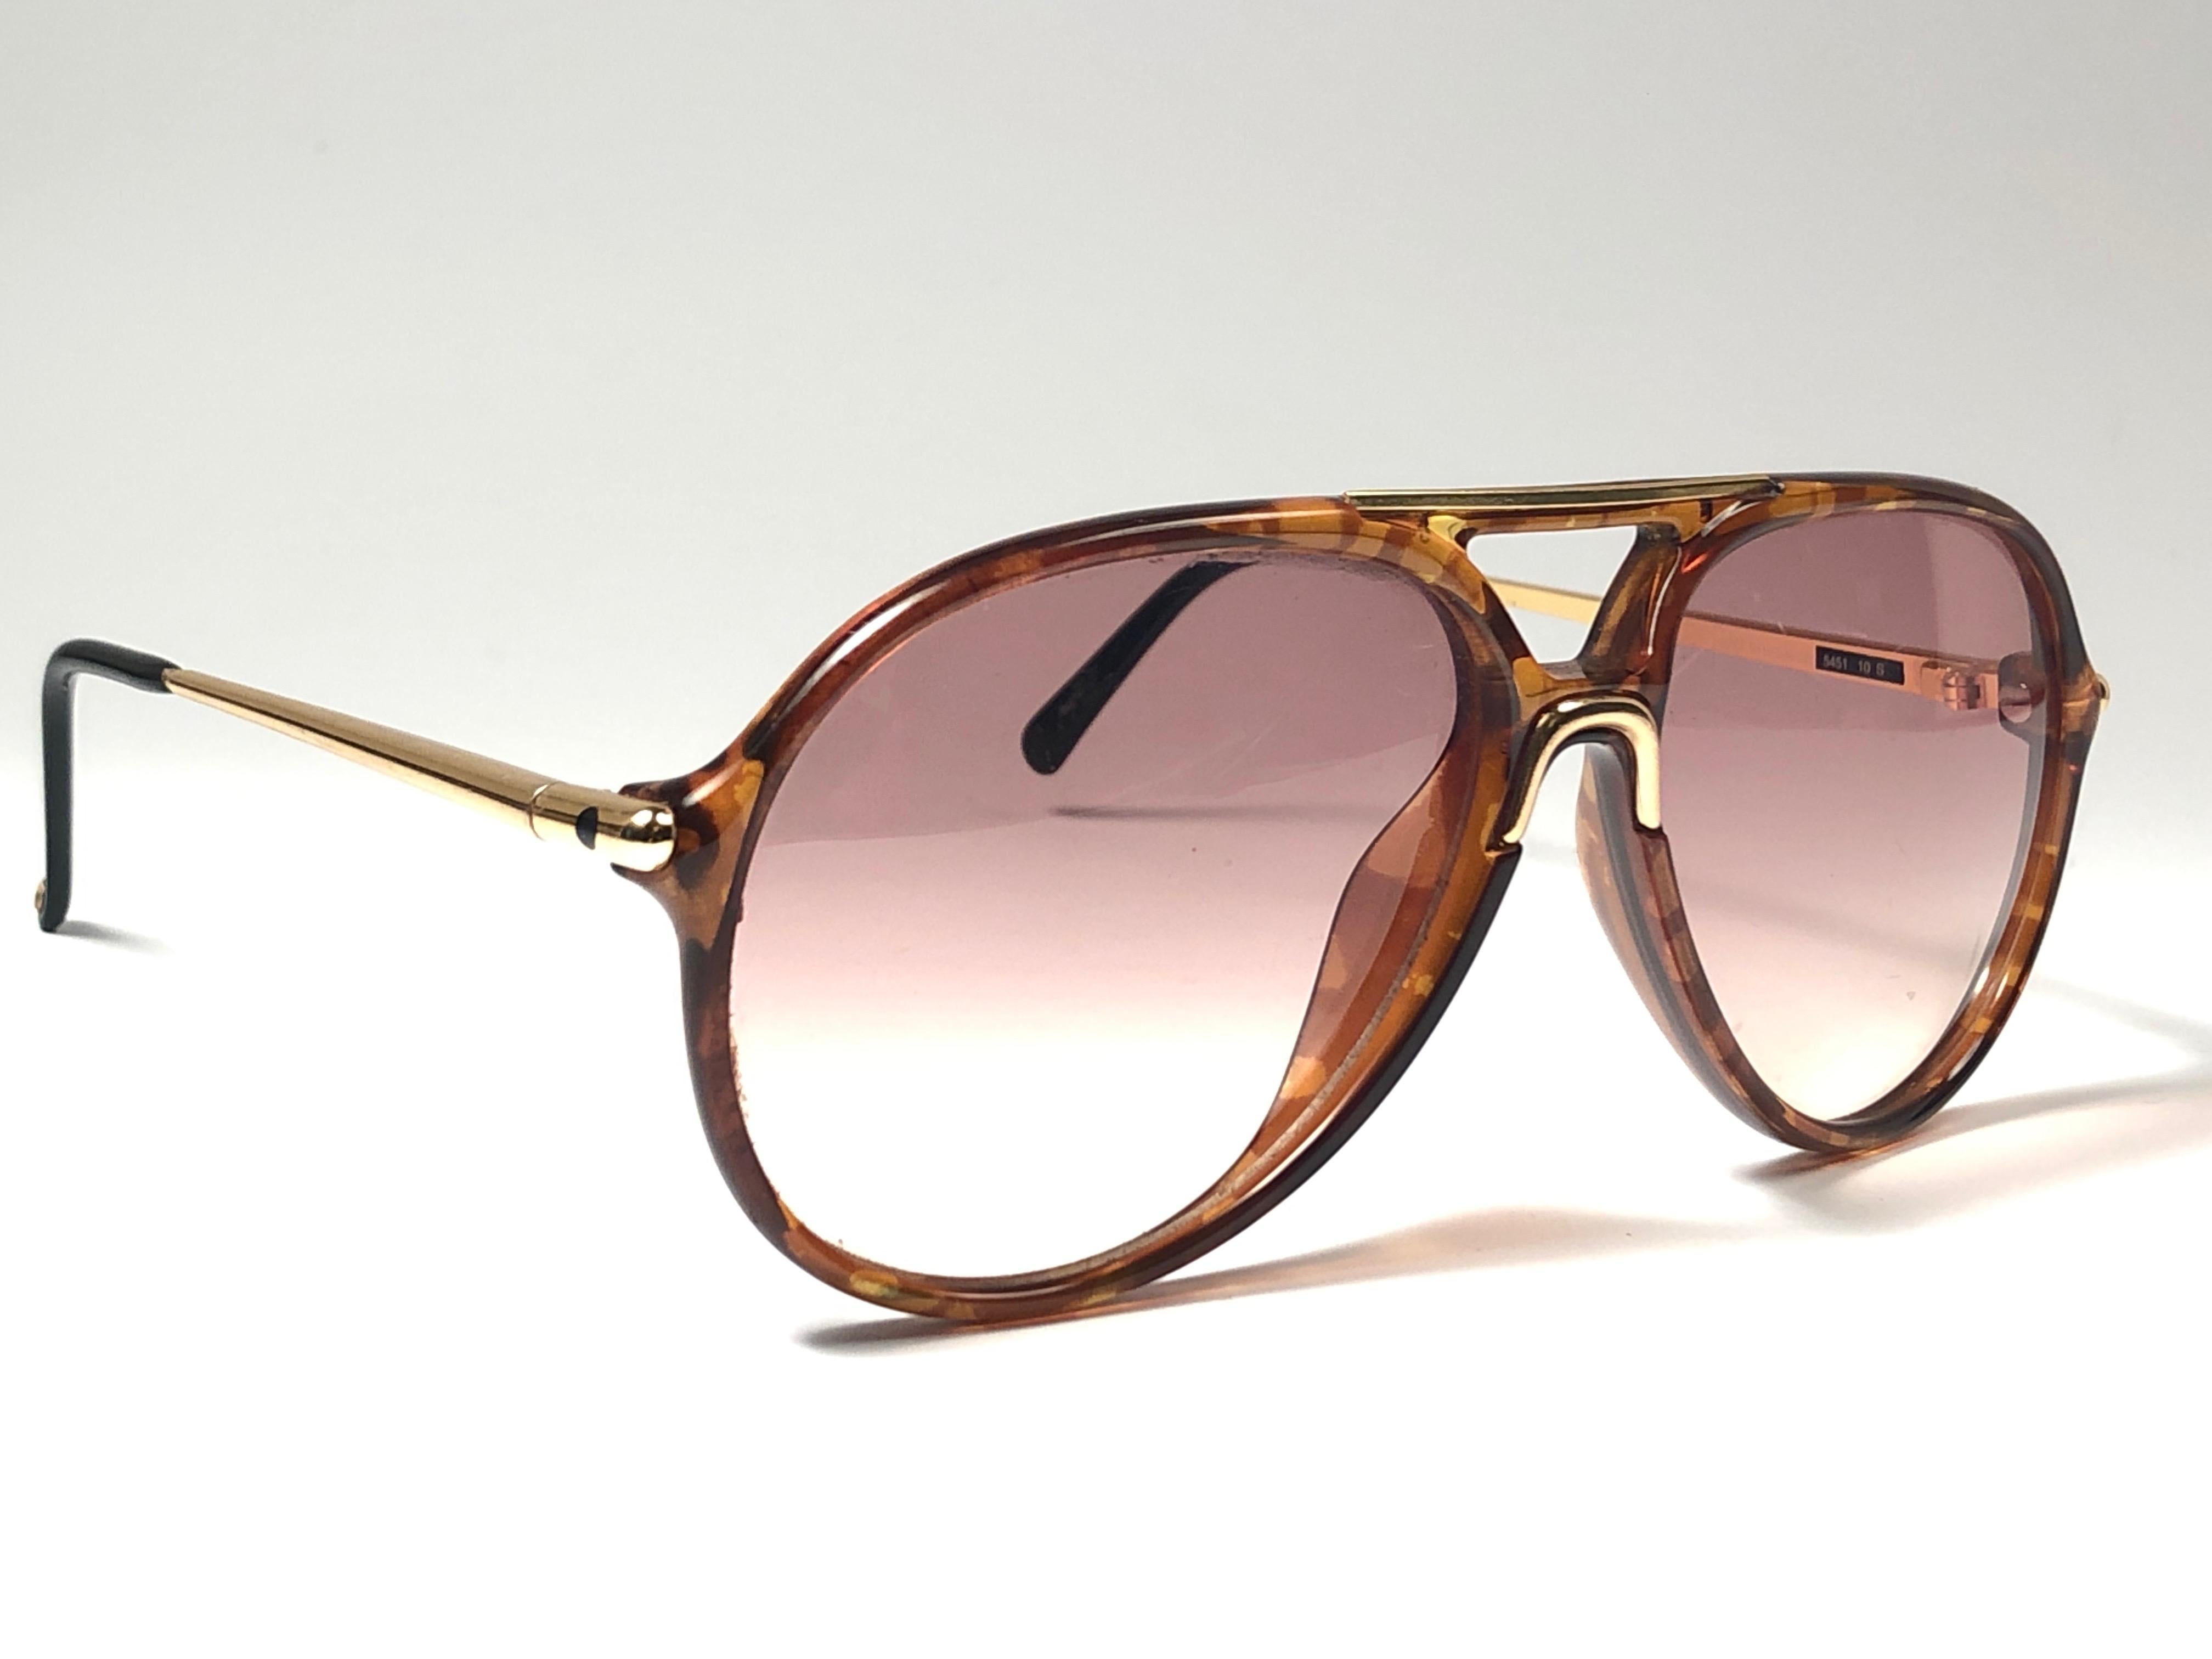 New 1980's Carrera by Movado tortoise frame with brown gradient lenses.  
Amazing craftsmanship and quality.  

This item has some wear on it due to nearly 40 years of storage. 

New, never worn. Made in Austria.